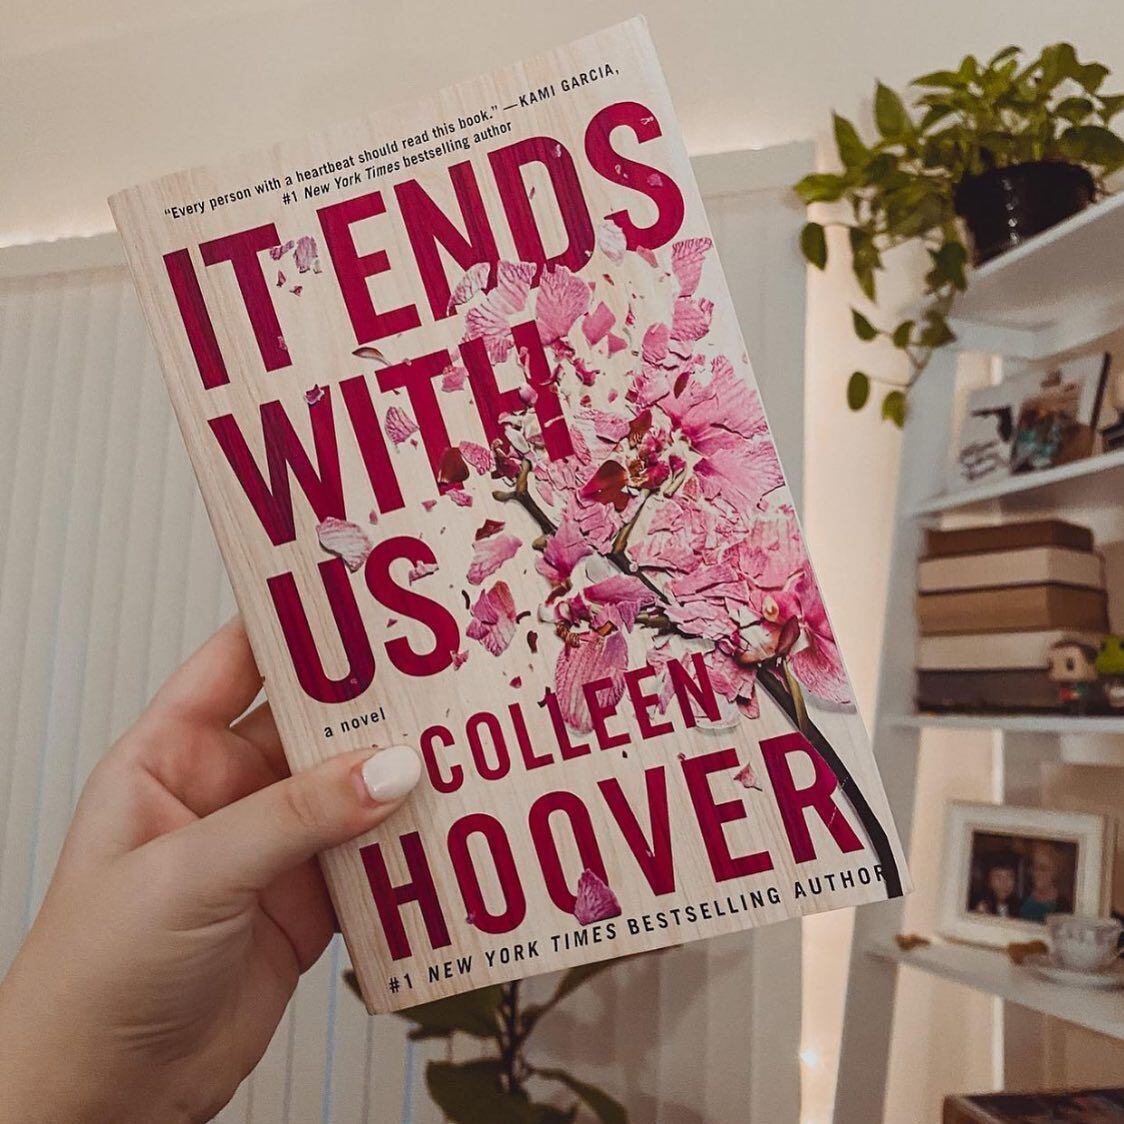 Colleen Hoover: Booktok's most divisive author - The Chronicle